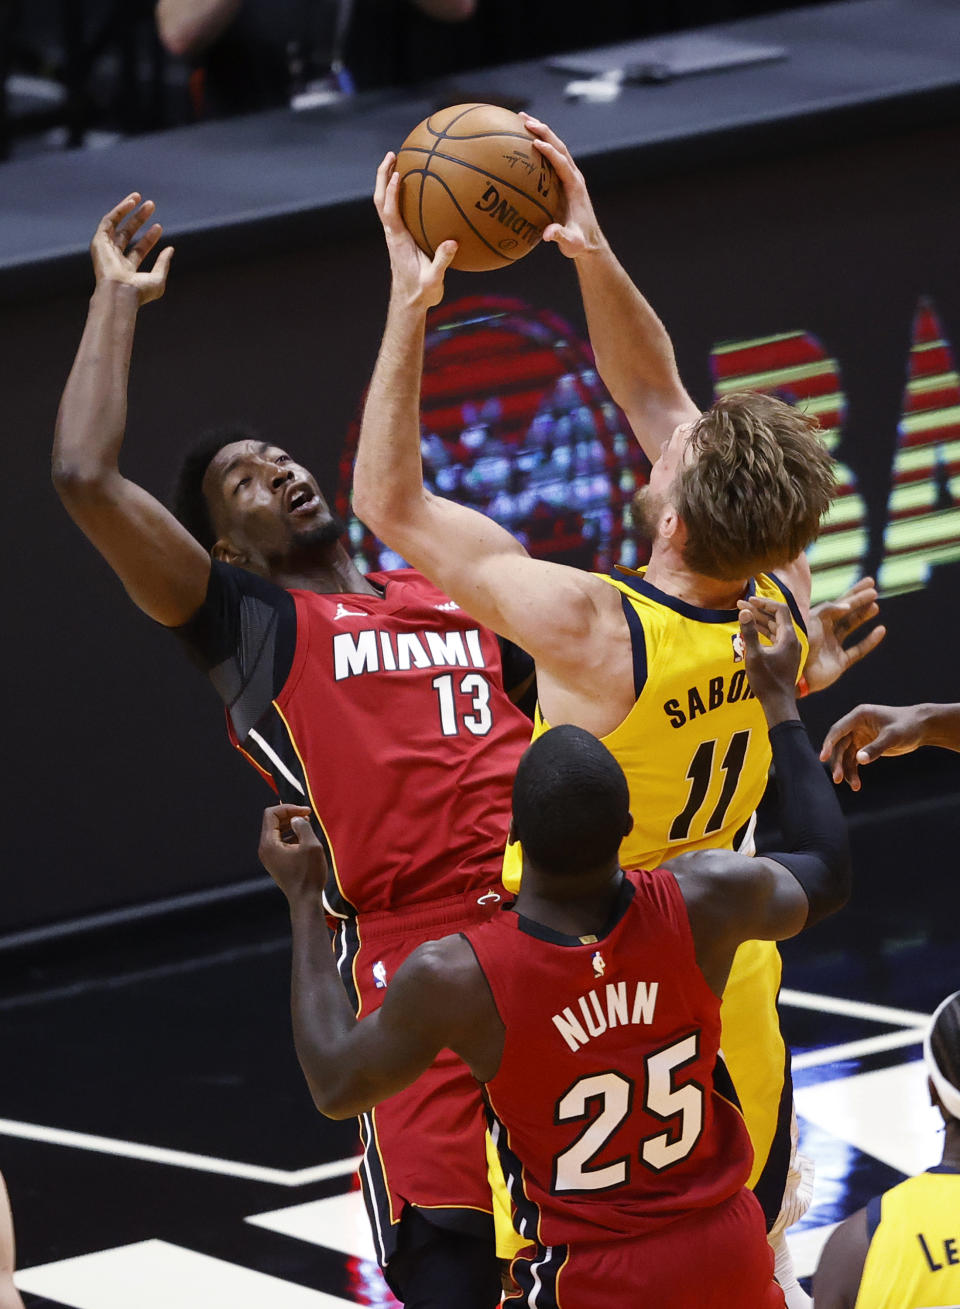 Miami Heat center Bam Adebayo (13) and guard Kendrick Nunn (25) defend against Indiana Pacers forward Domantas Sabonis (11) during the second half of an NBA basketball game Friday, March 19, 2021, in Miami. (AP Photo/Joel Auerbach)